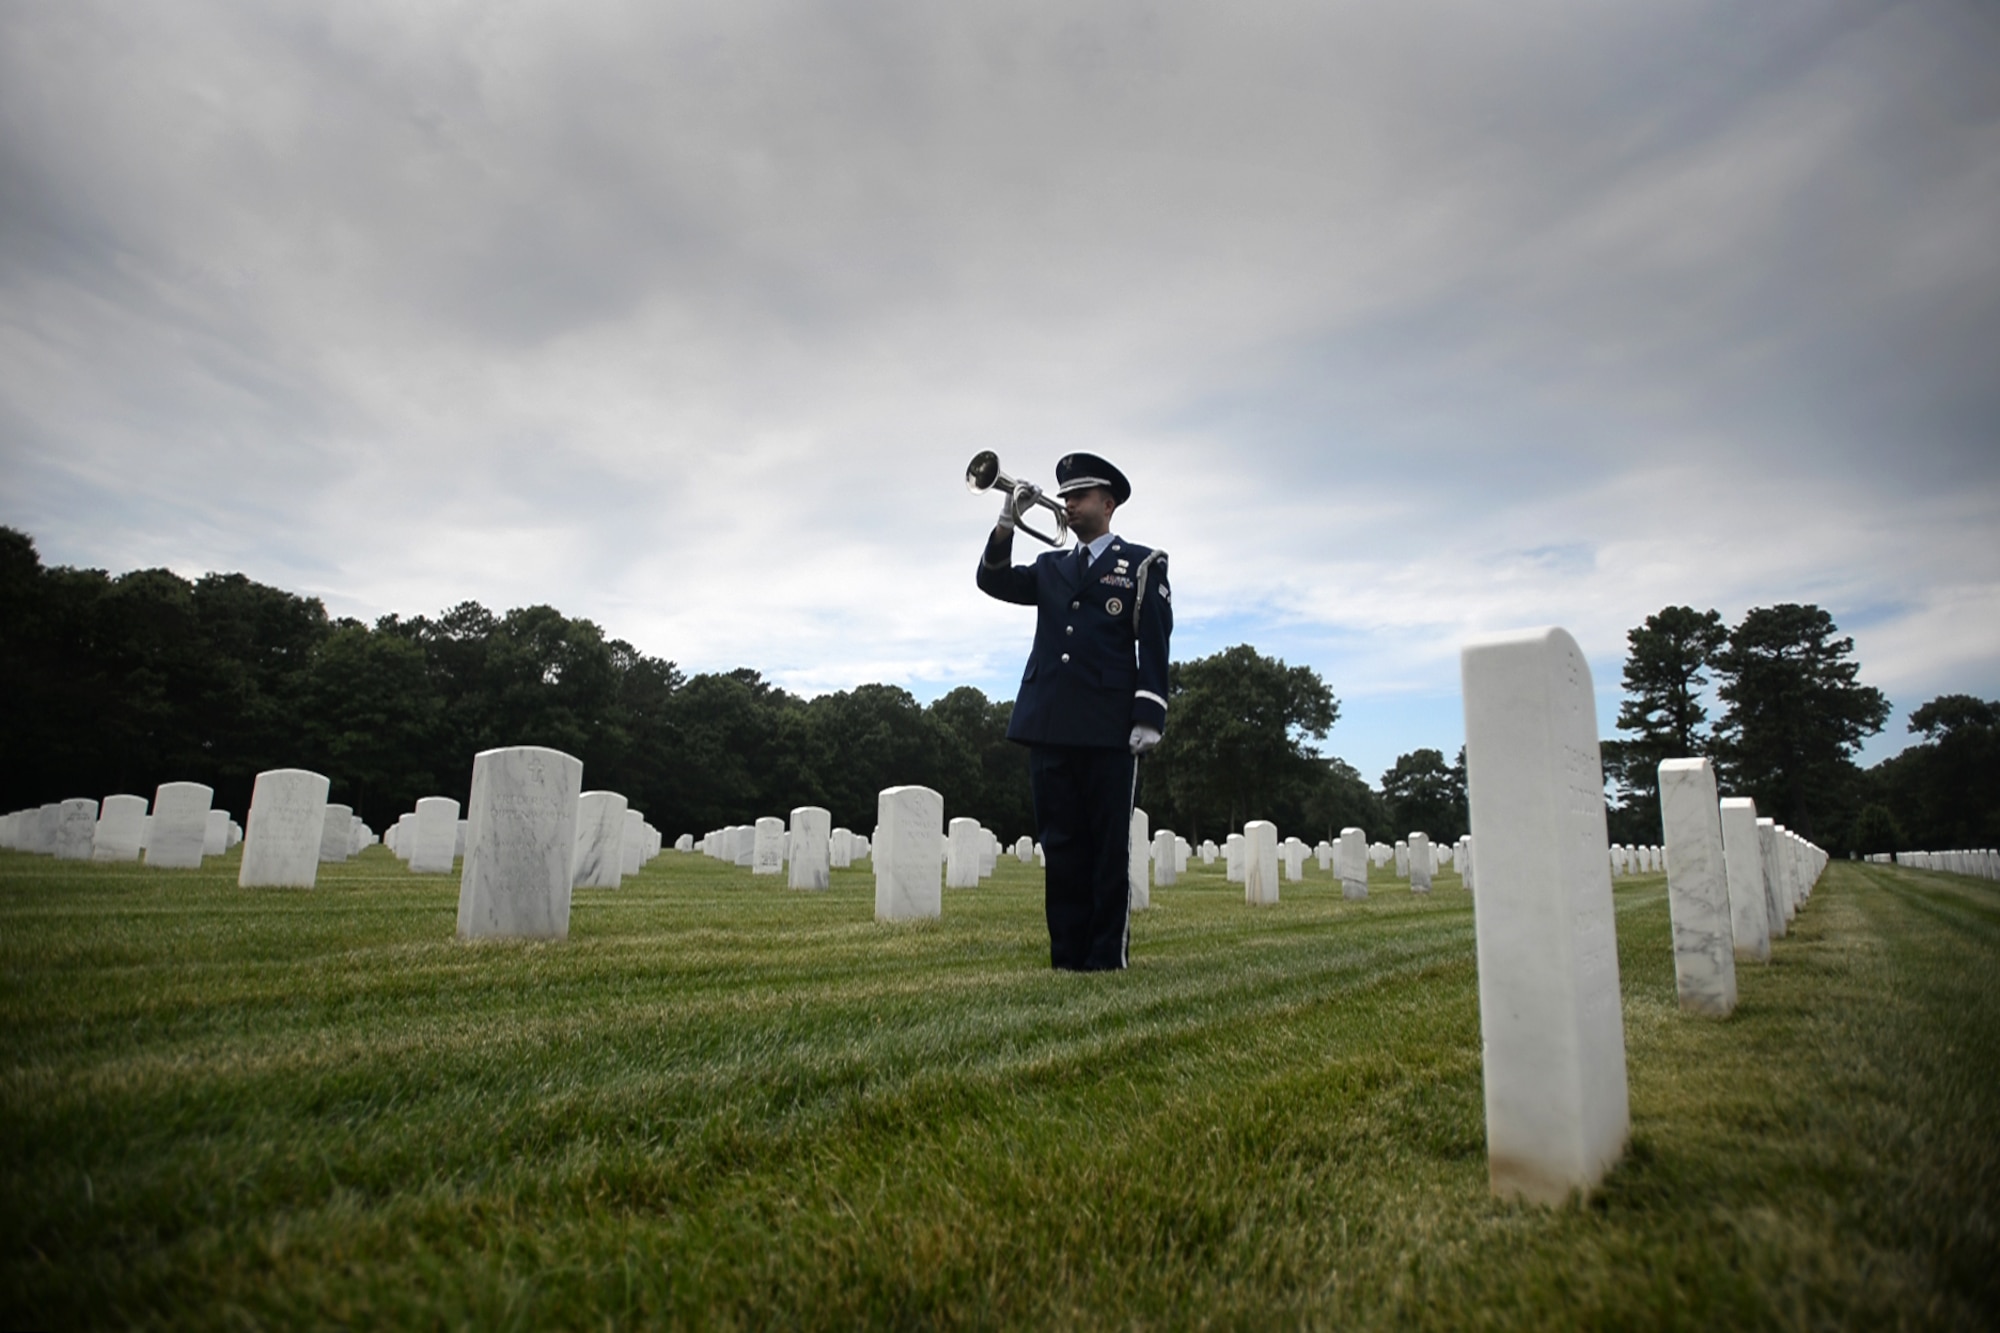 Senior Airman Michael C. Dancona and Senior Airman Dominic Surinaga, both members of the 106th Rescue Wing Honor Guard, conduct services at Calverton National Cemetery July 22, 2015. As part of their daily work, the 106th Honor Guard performs funeral services at military burial grounds throughout New York.
(New York Air National Guard photo/Staff Sergeant Christopher S. Muncy)
